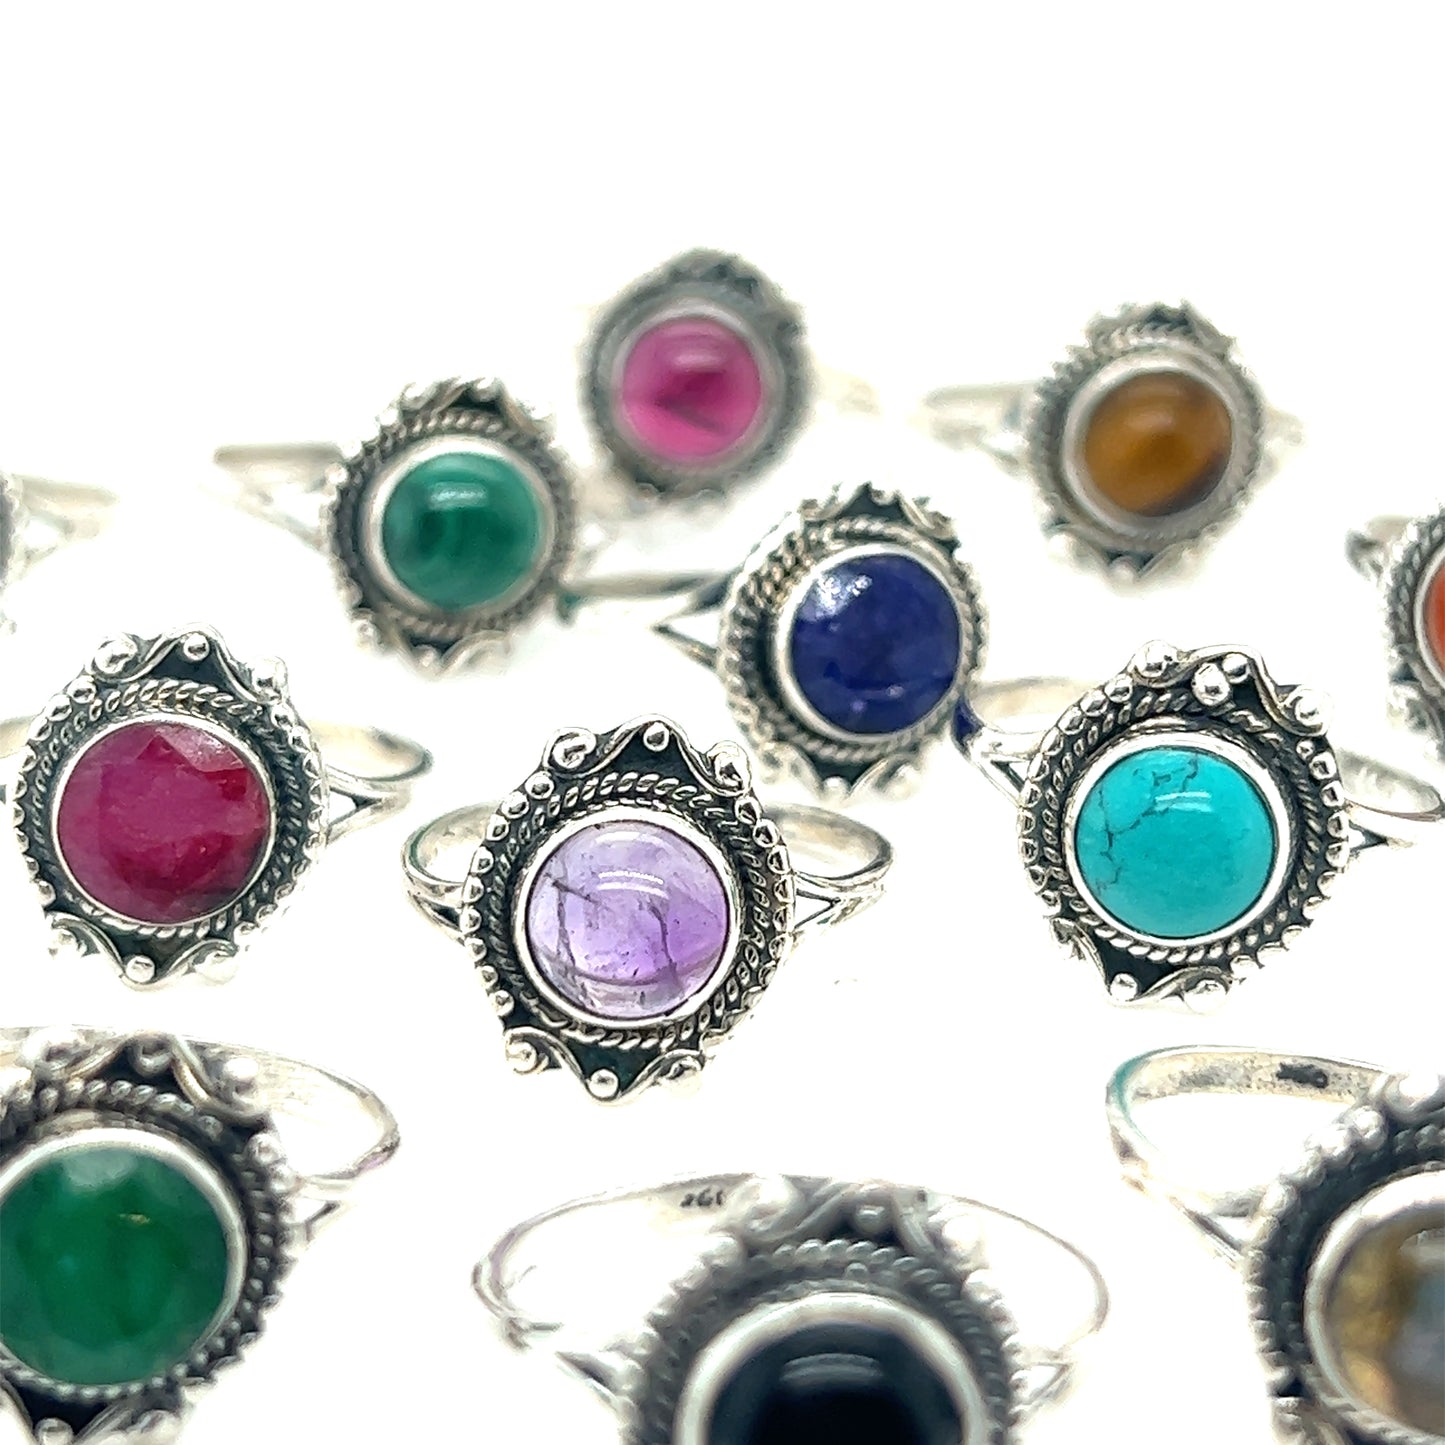 A collection of Round Gemstone Rings With Vintage Setting with various inlays, including amethyst, turquoise, and others, displayed in rows on a white background. Perfect for those who appreciate Bohemian jewelry and the timeless appeal of sterling silver rings.